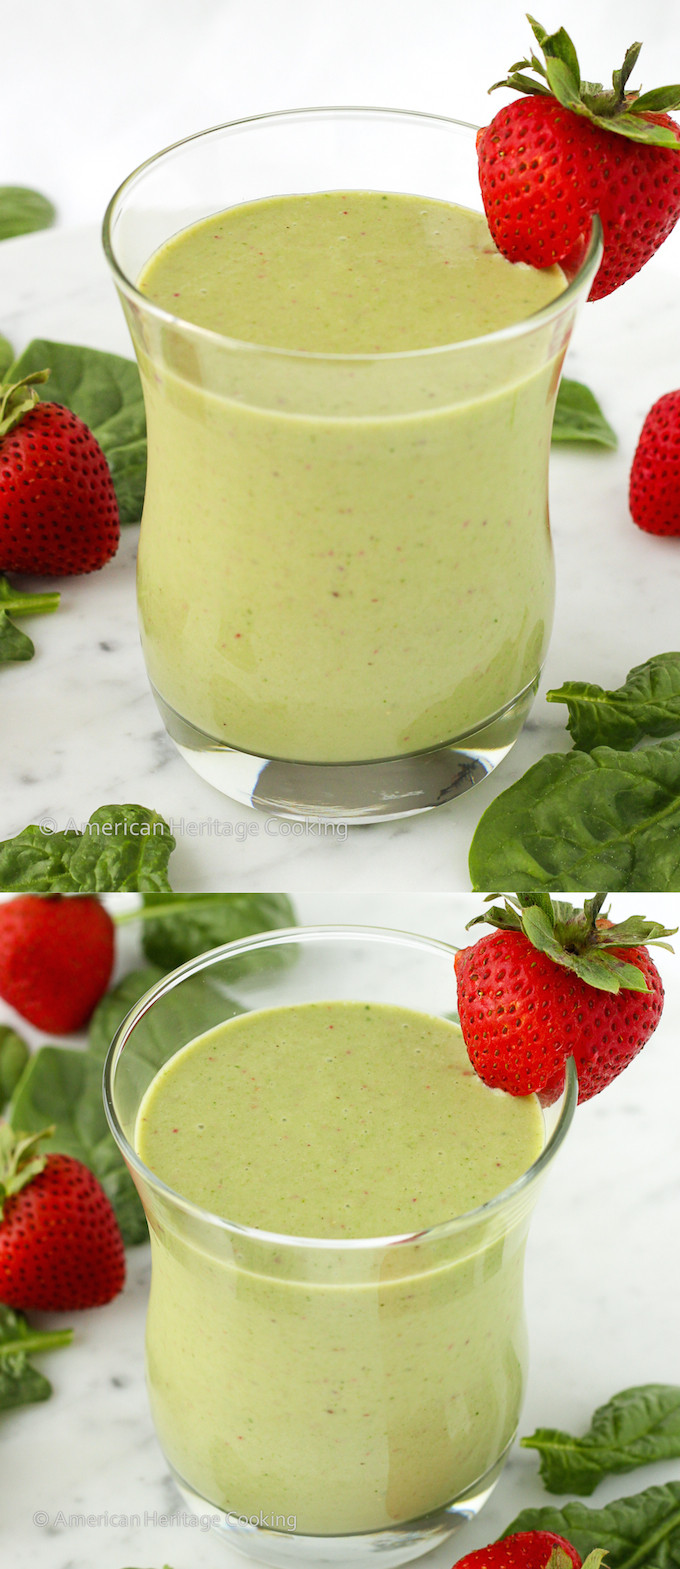 Healthy Smoothies With Spinach
 Strawberry Banana Spinach Smoothie American Heritage Cooking